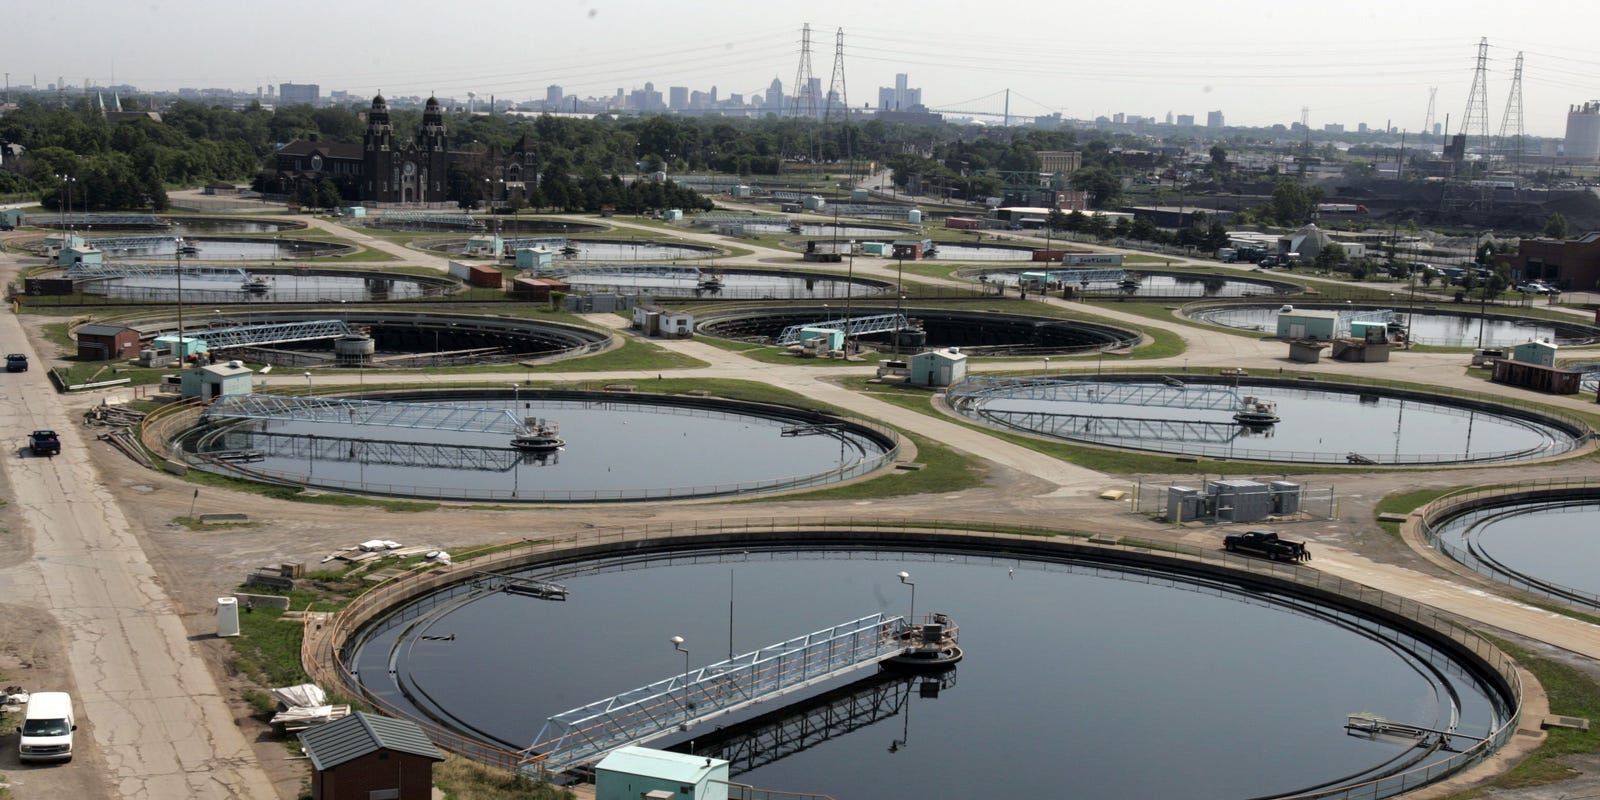 Could sewage testing in Detroit serve as a COVID-19 early-warning system? - Detroit Free Press